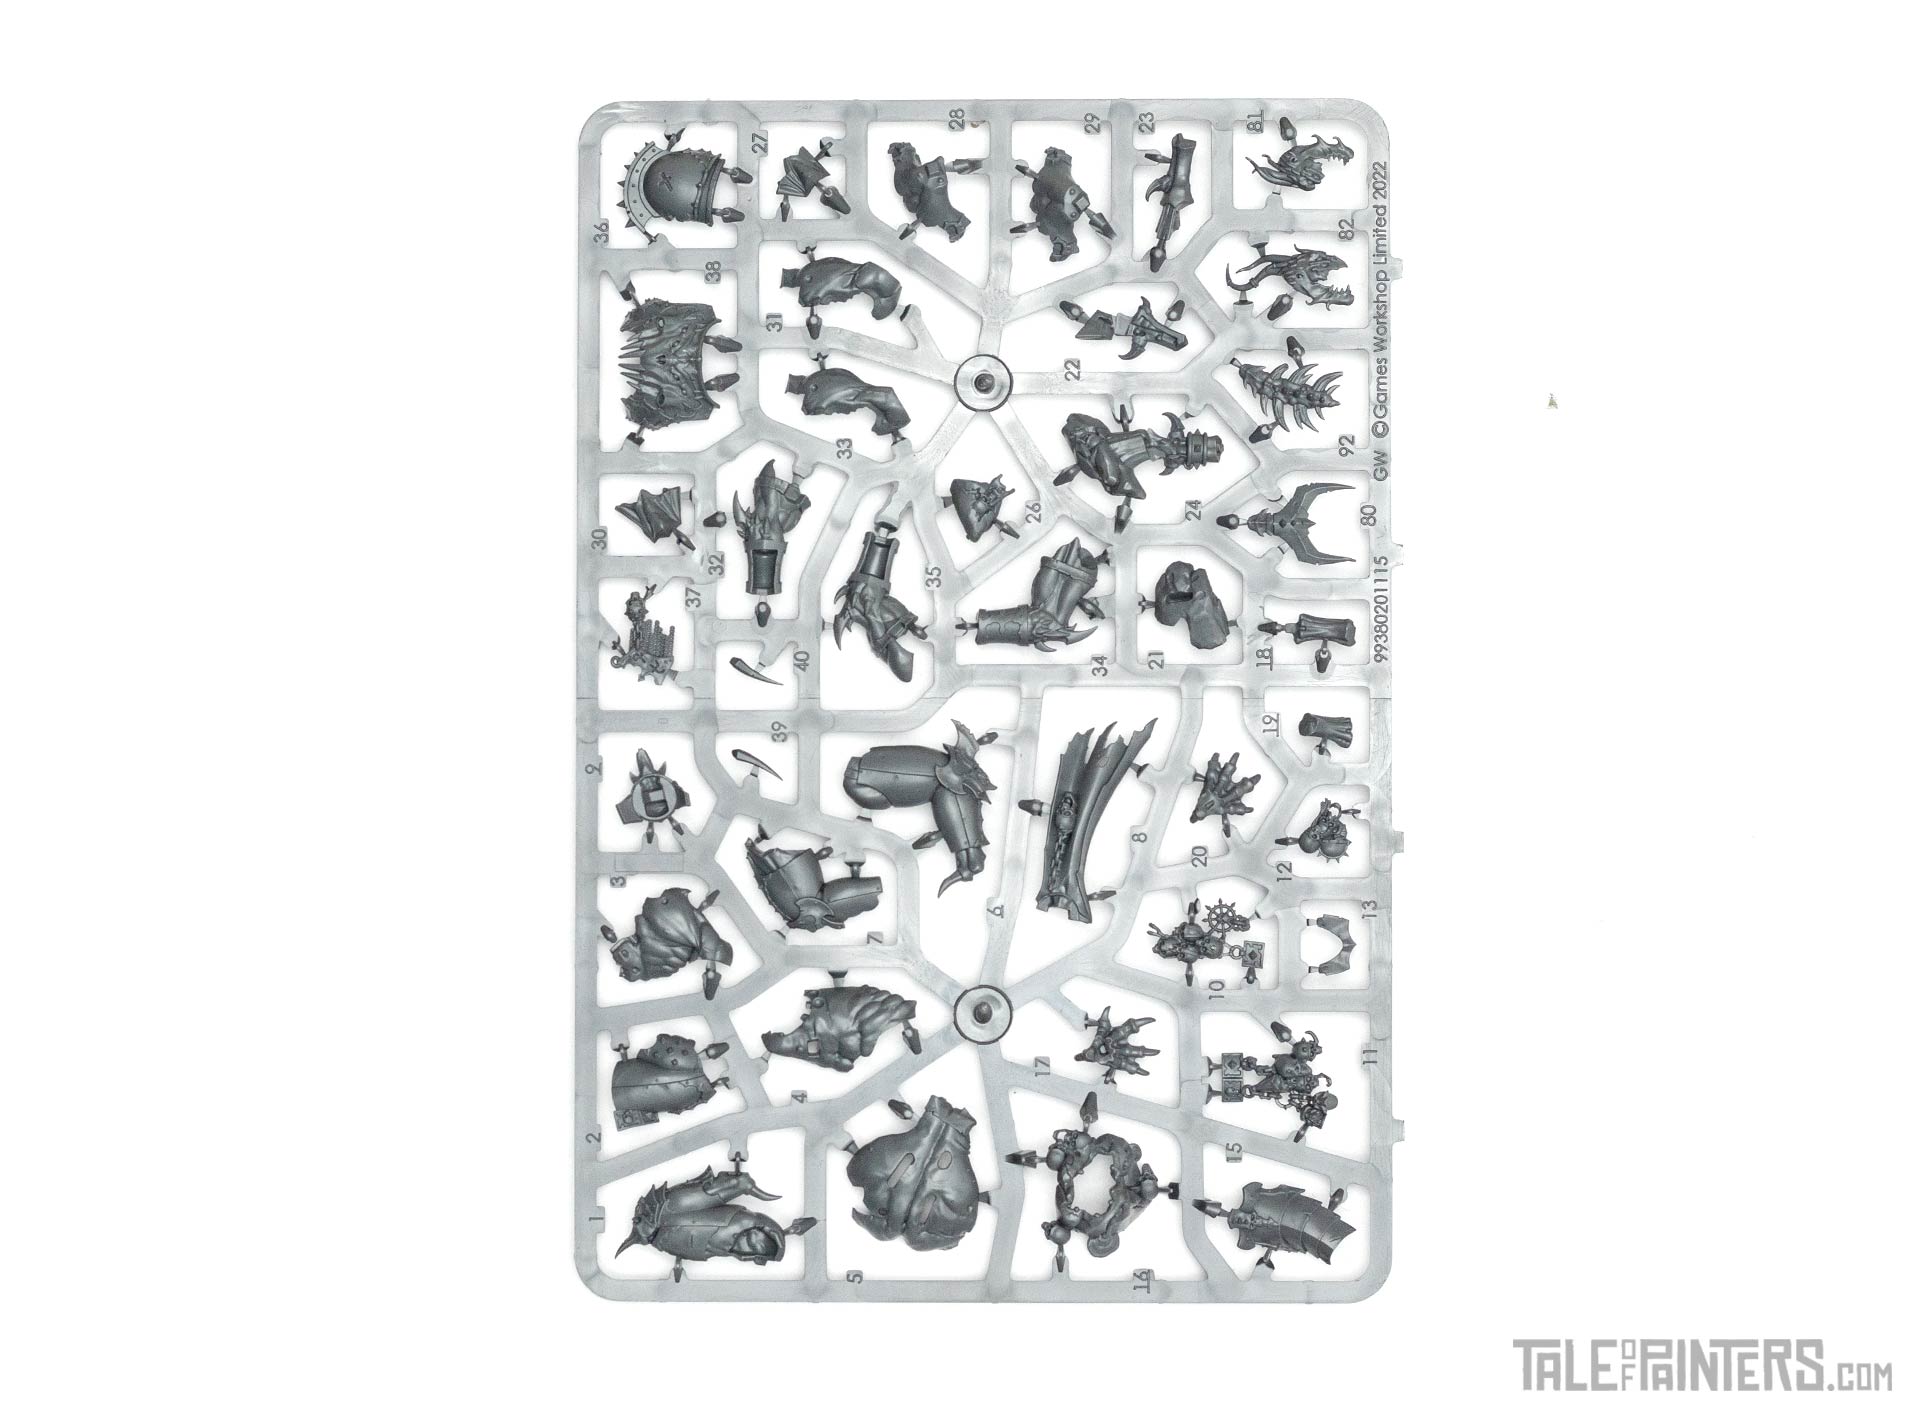 New plastic Chaos Daemon Prince sprues from the Slaves to Darkness army set